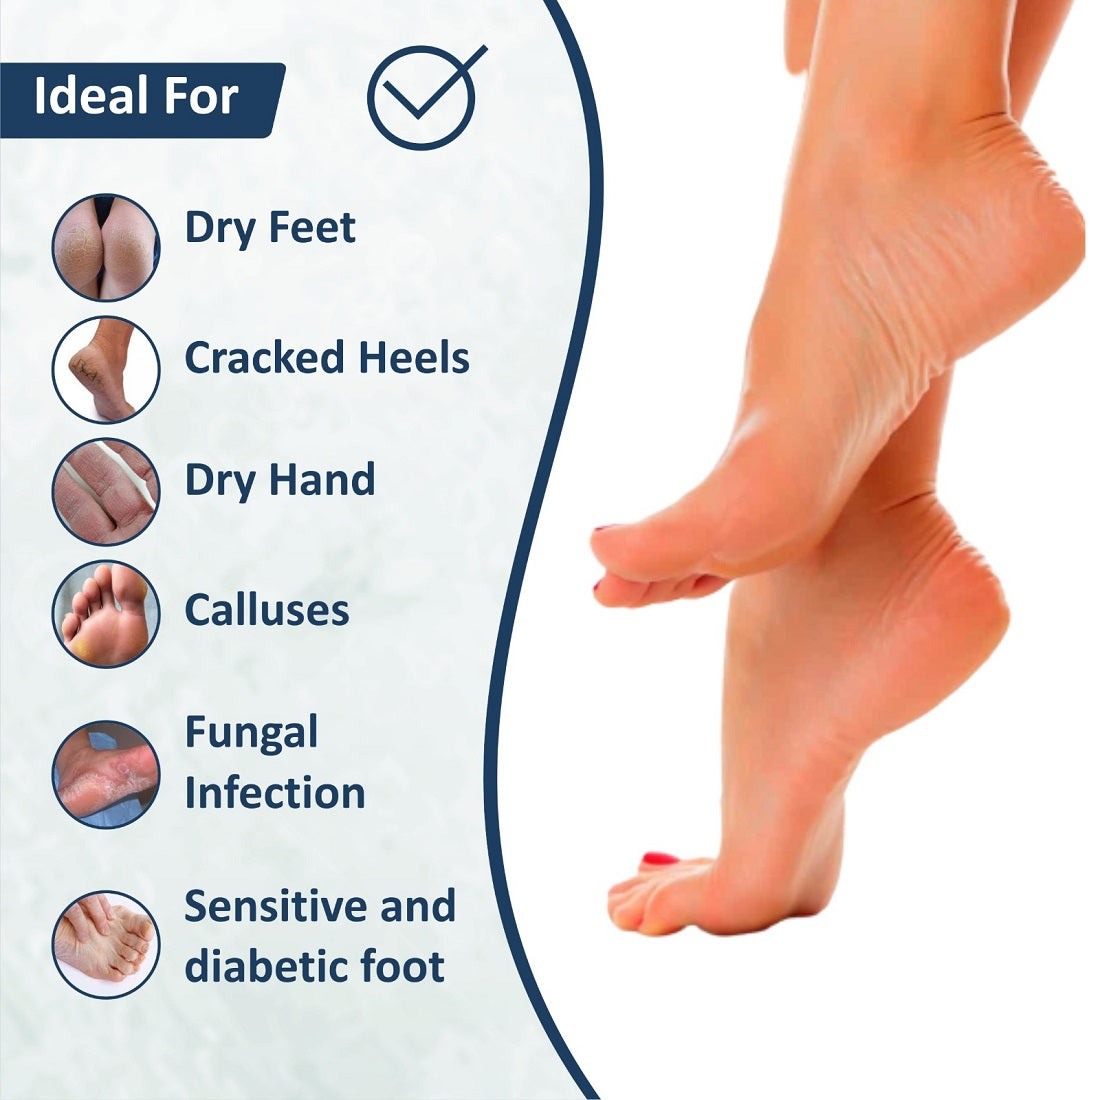 Glutaflo Foot Cream For Rough, Dry and Cracked Heel, Feet Cream For Heel Repair With Benefits of Urea, Lactic Acid and Vitamin E All Skin Types 100 Gm.